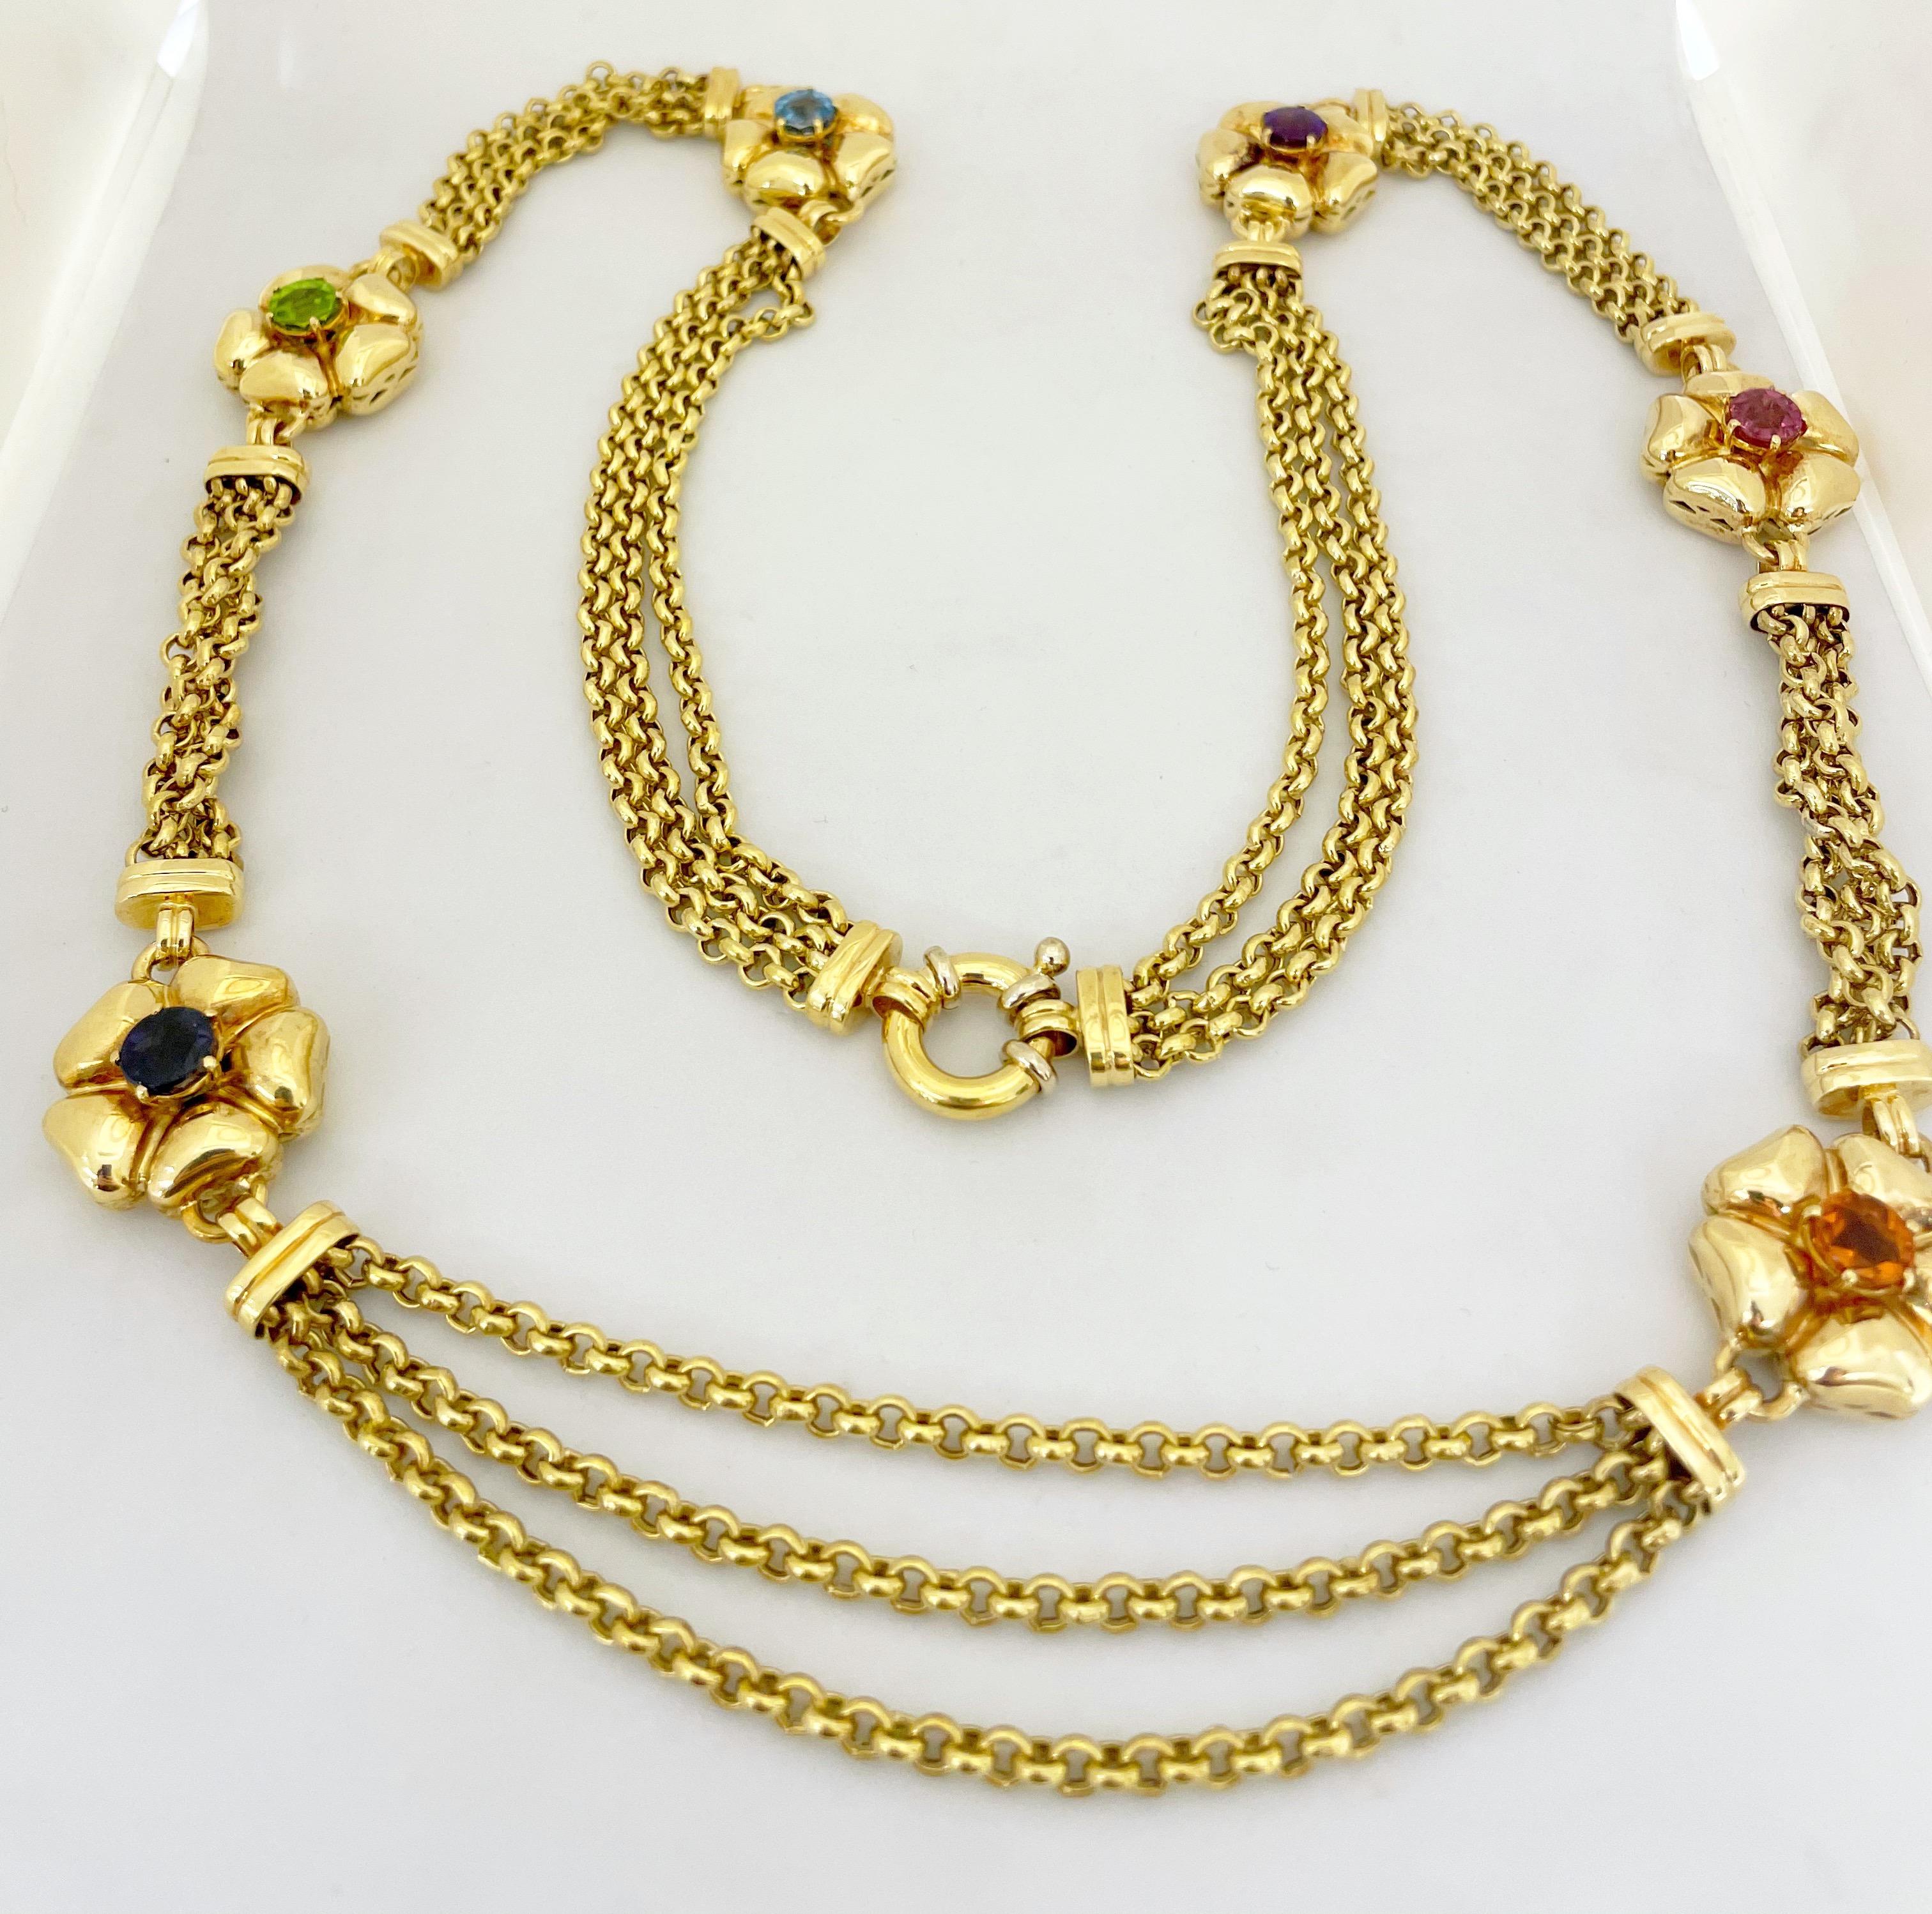 Italian Jewelers for more than three generations, VAID has produced merchandise exclusively for some of the most renowned jewelers across the world. This VAID 18 karat yellow gold necklace is designed with 6 shiny gold flowers each with a round semi